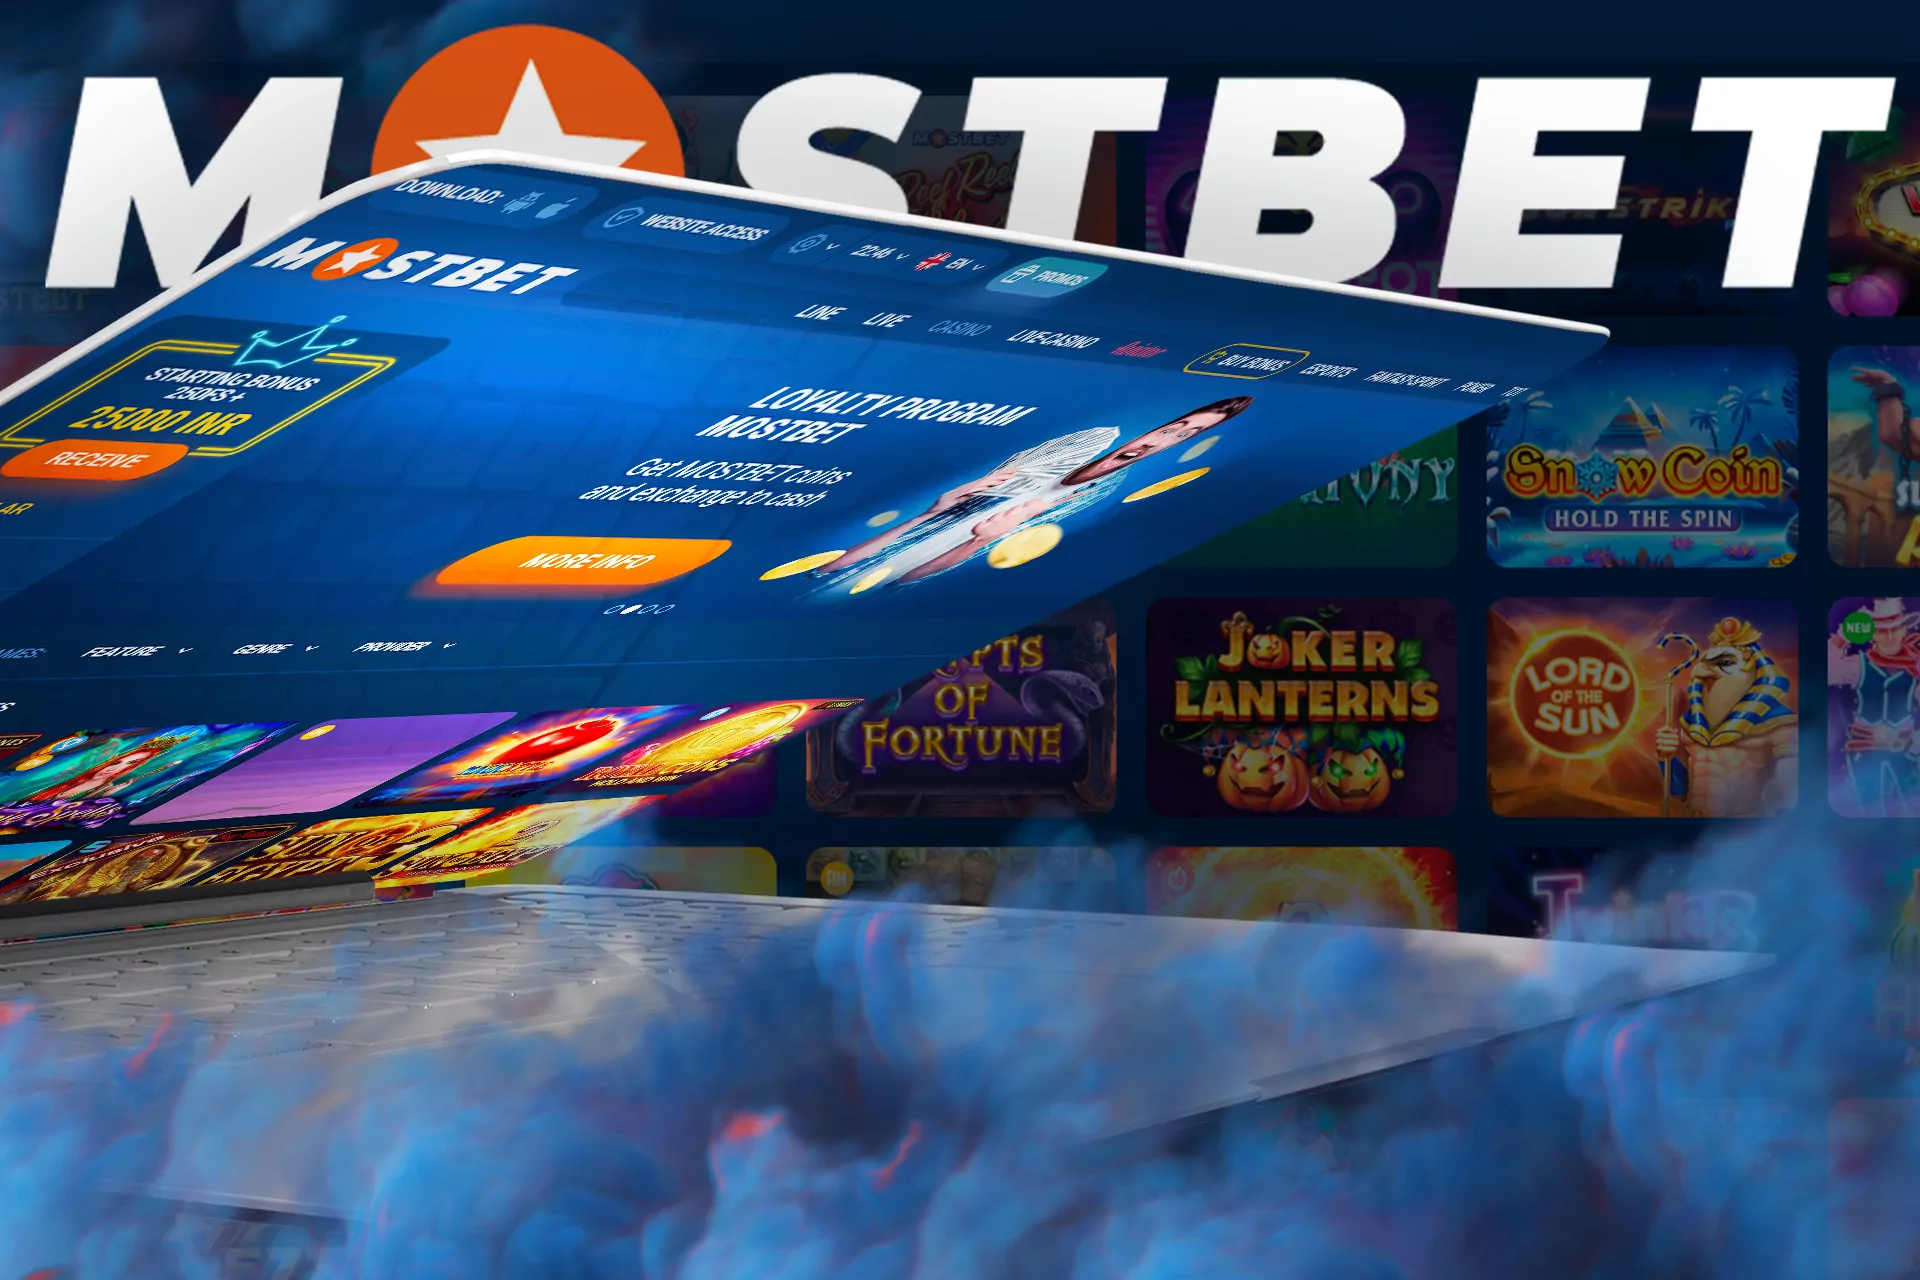 There is a classic casino with slots and table games at Mostbet as well.